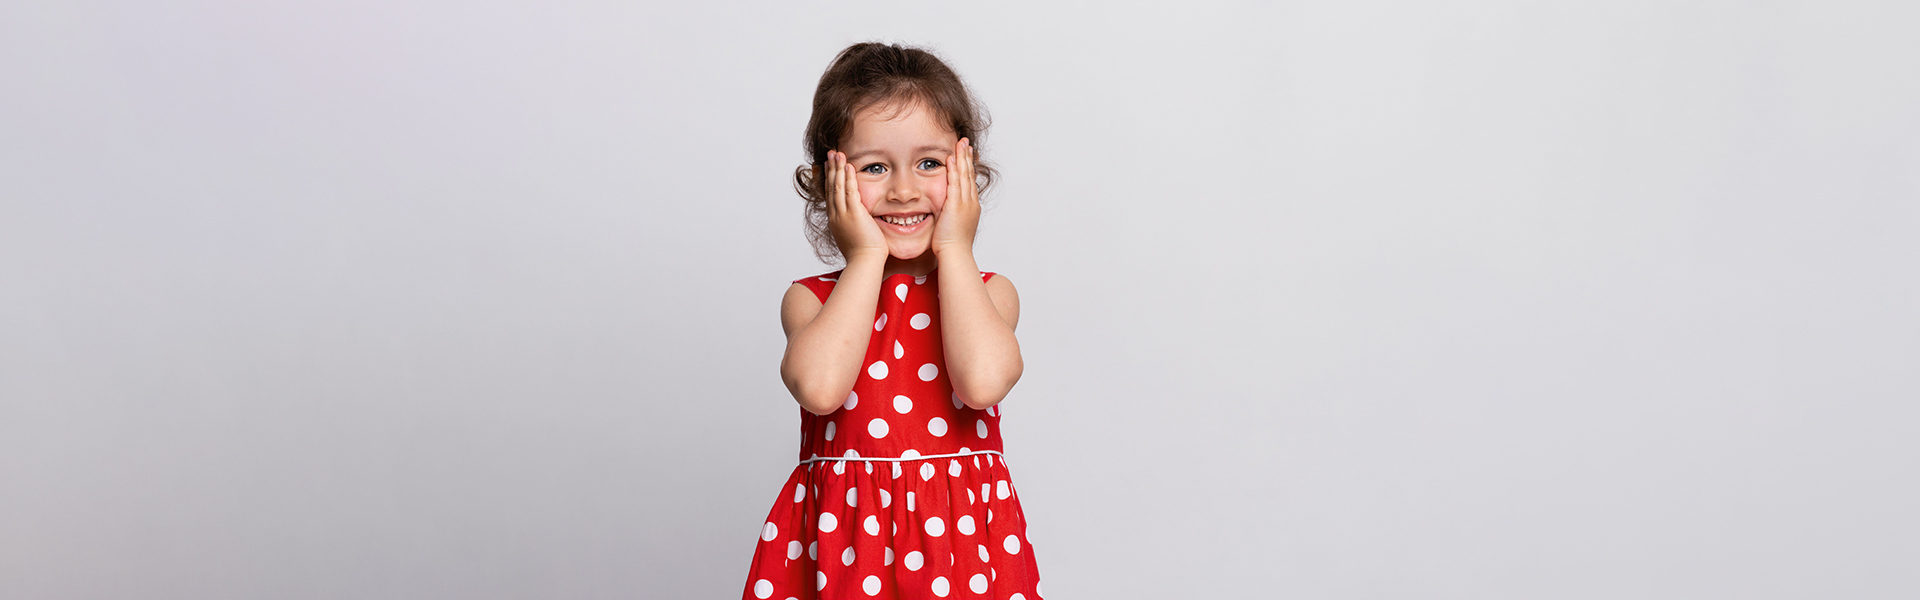 Here’s Why Pediatric Dentists Are Perfect for Children of All Ages